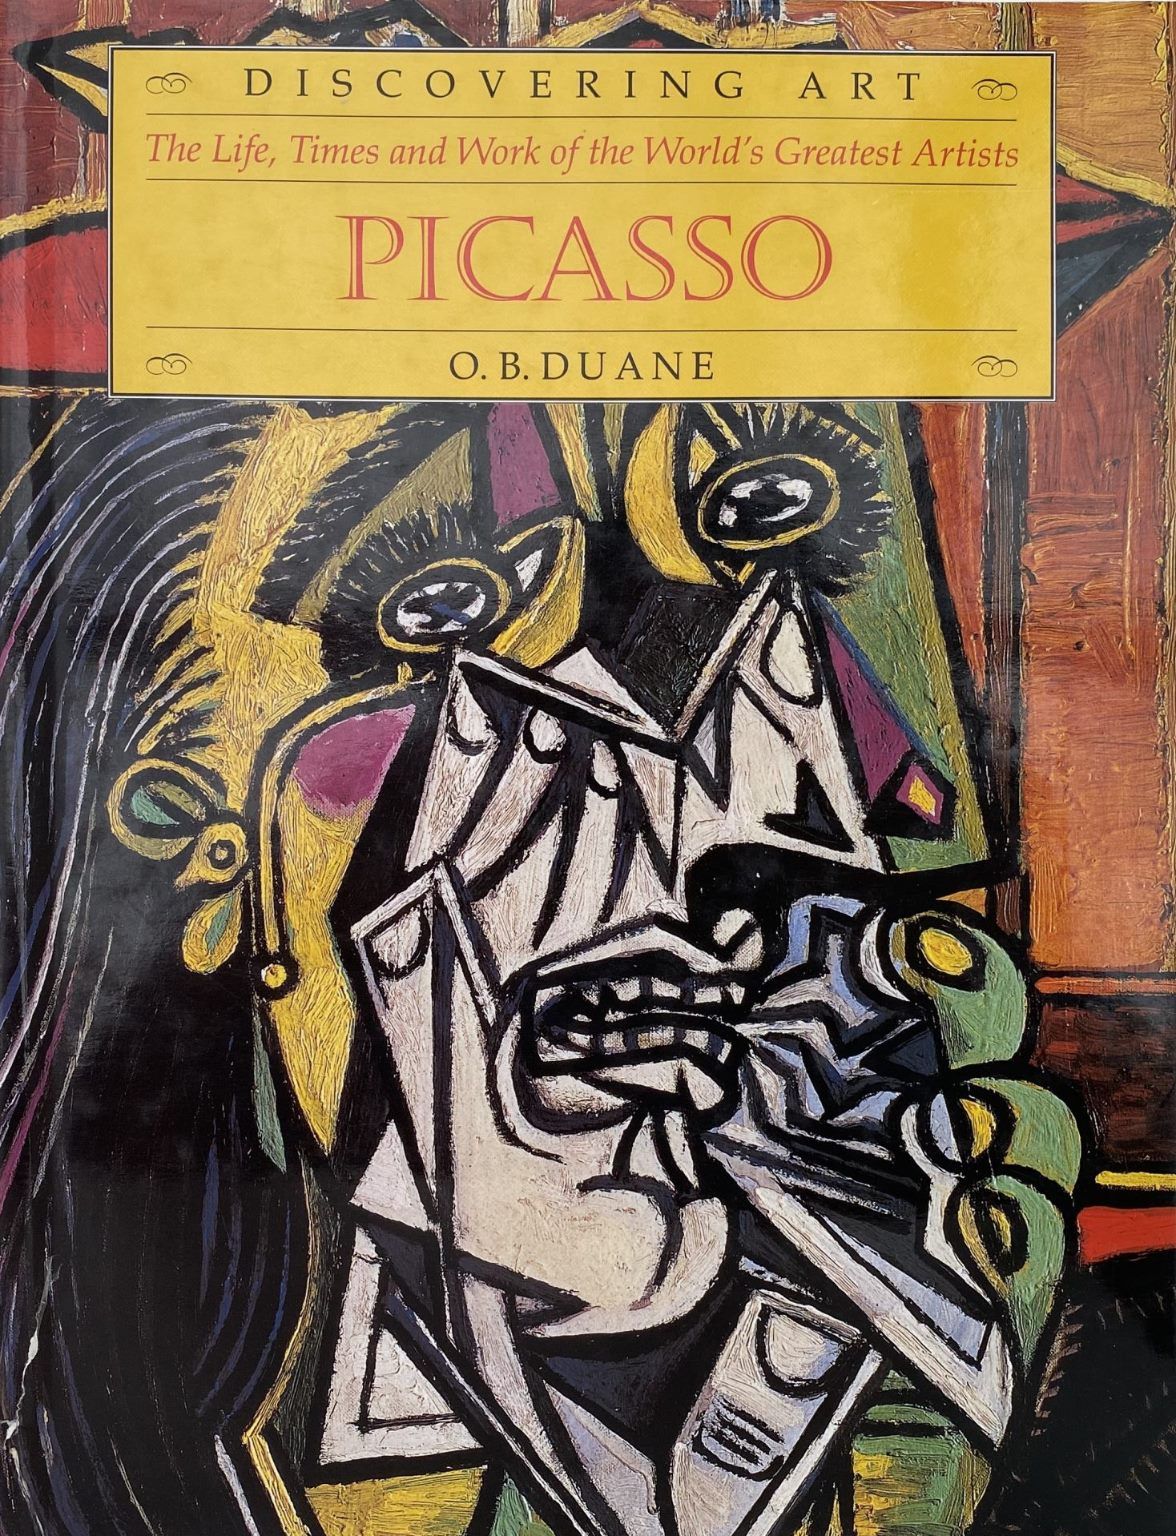 PICASSO: The Life, Times and Work of The World's Greatest Artist